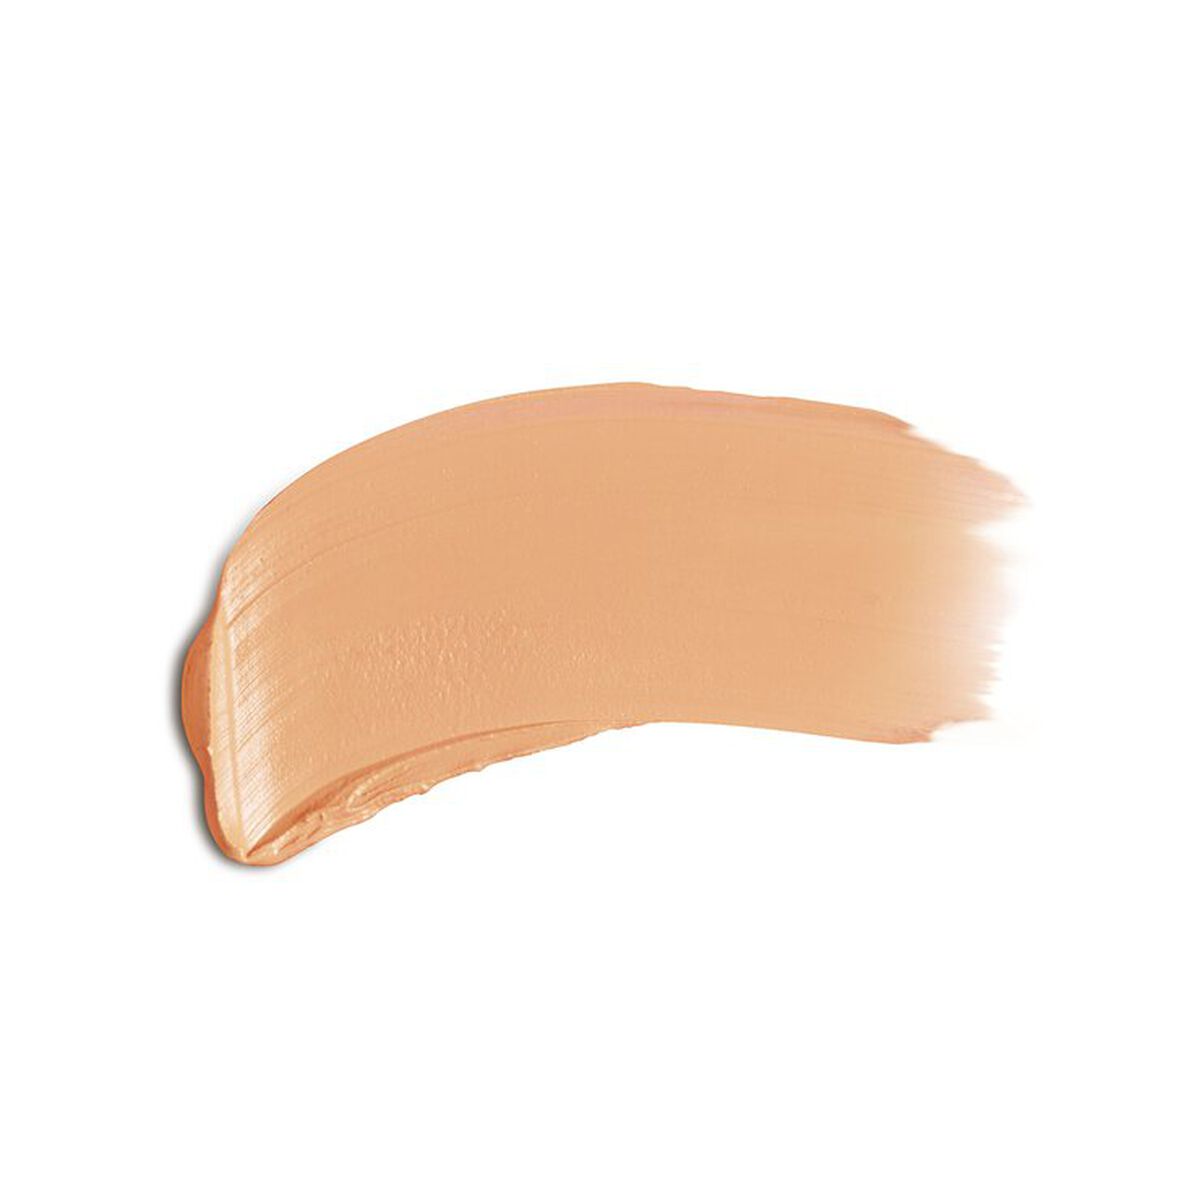 POWER FABRIC COMPACT FOUNDATION